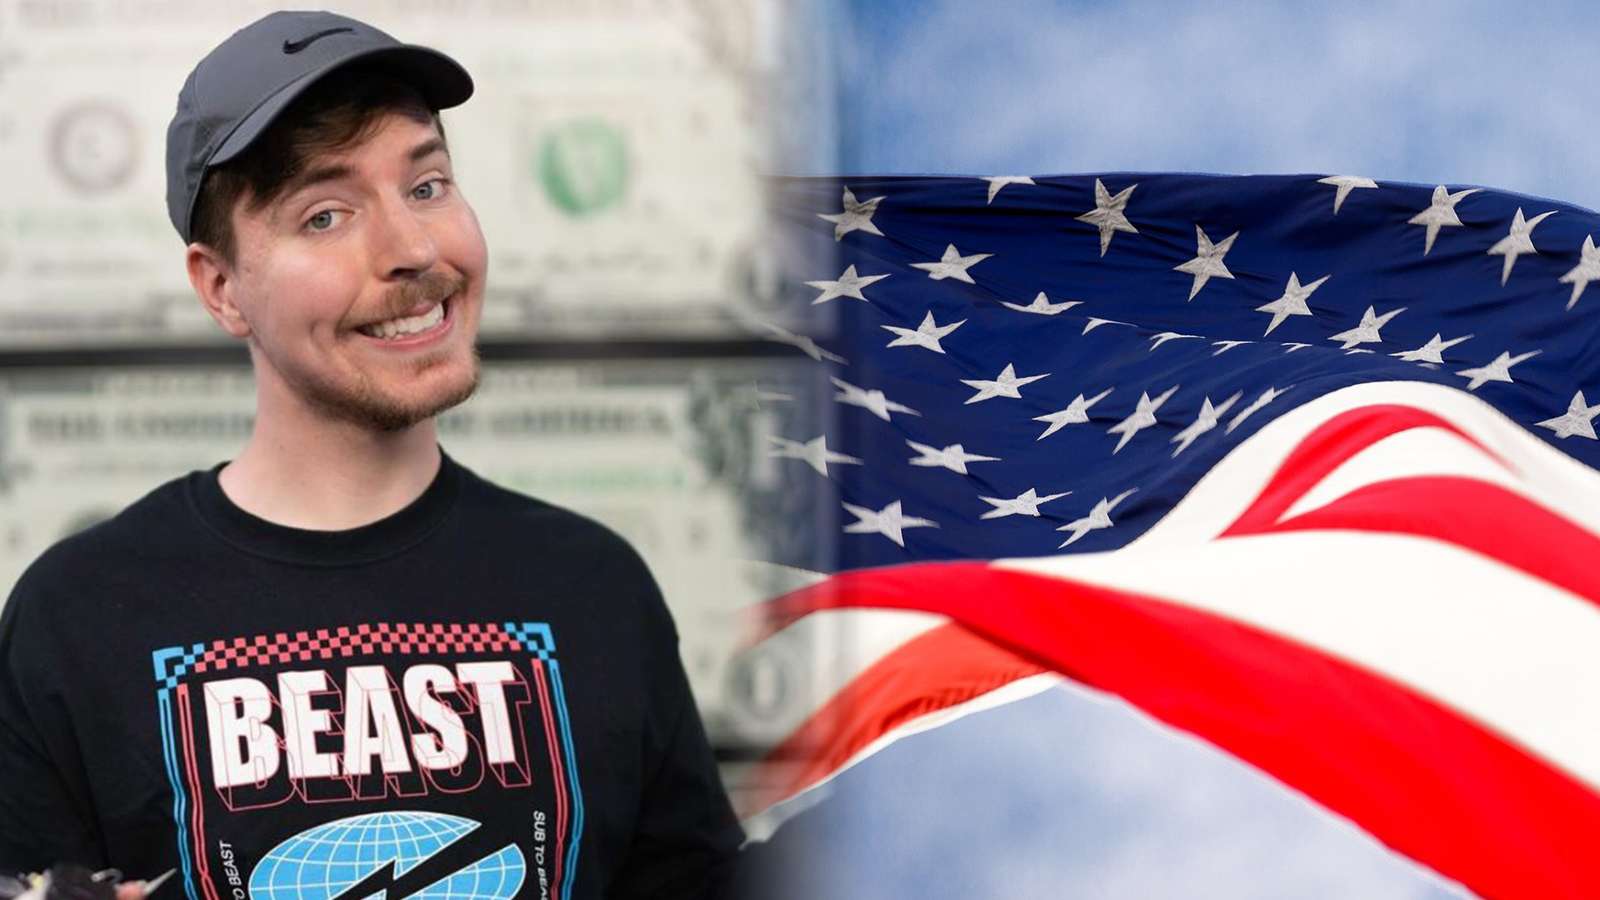 Mr Beast poses next to the American flag.